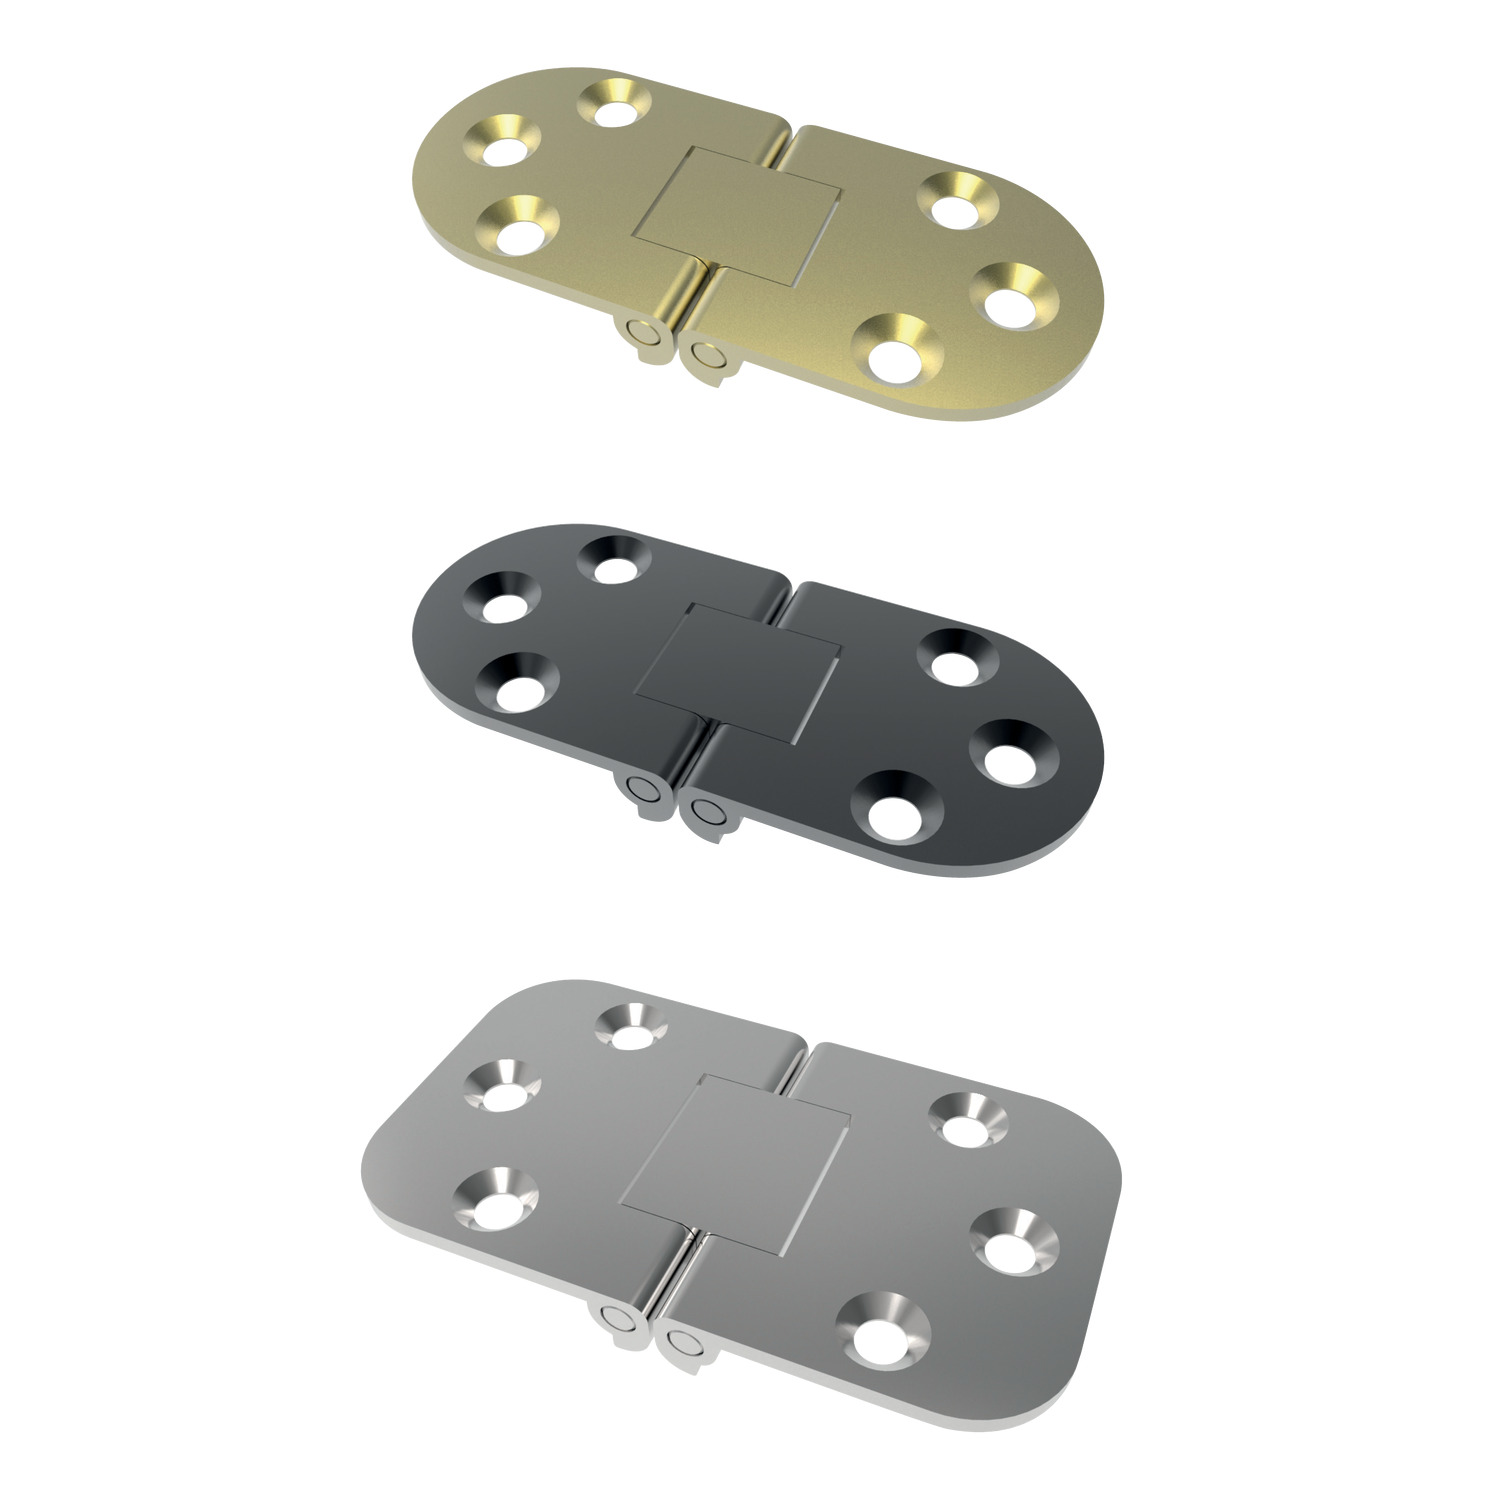 Product S2052, Flush Mount - Drop Lid Hinges two pivot overlay - brass / 